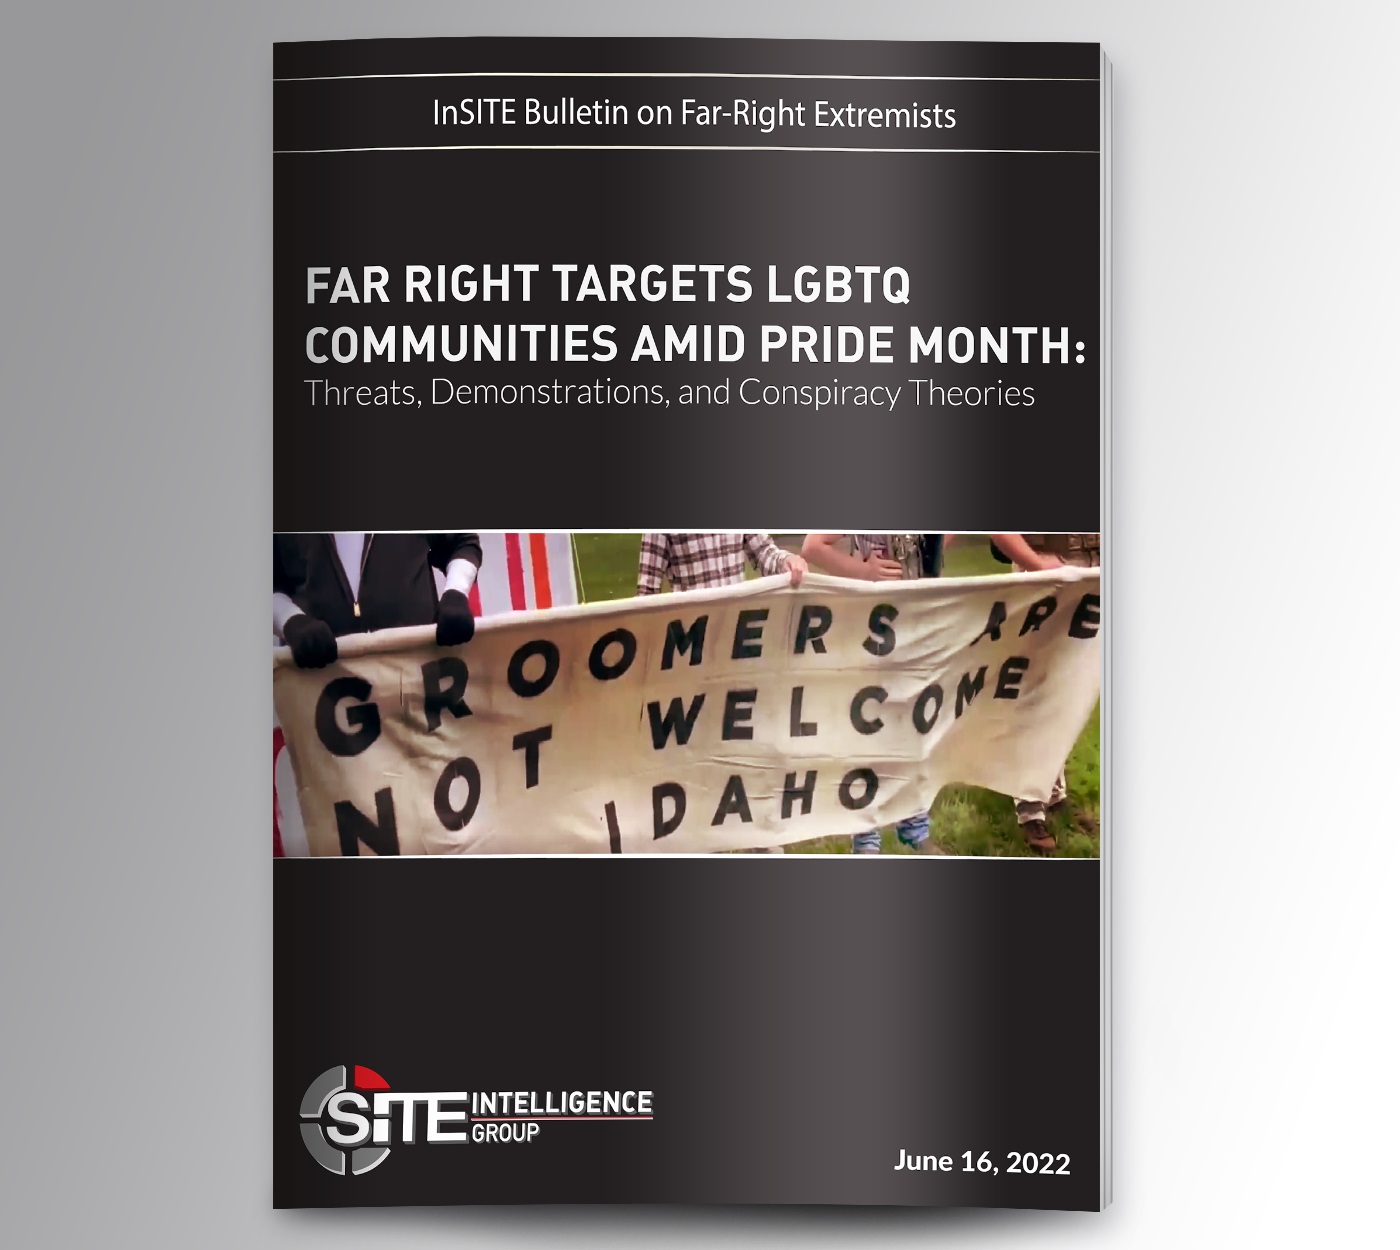 inSITE Bulletin on Far-Right Extremists: Far-Right Targets LGBTQ Communities amid Pride Month